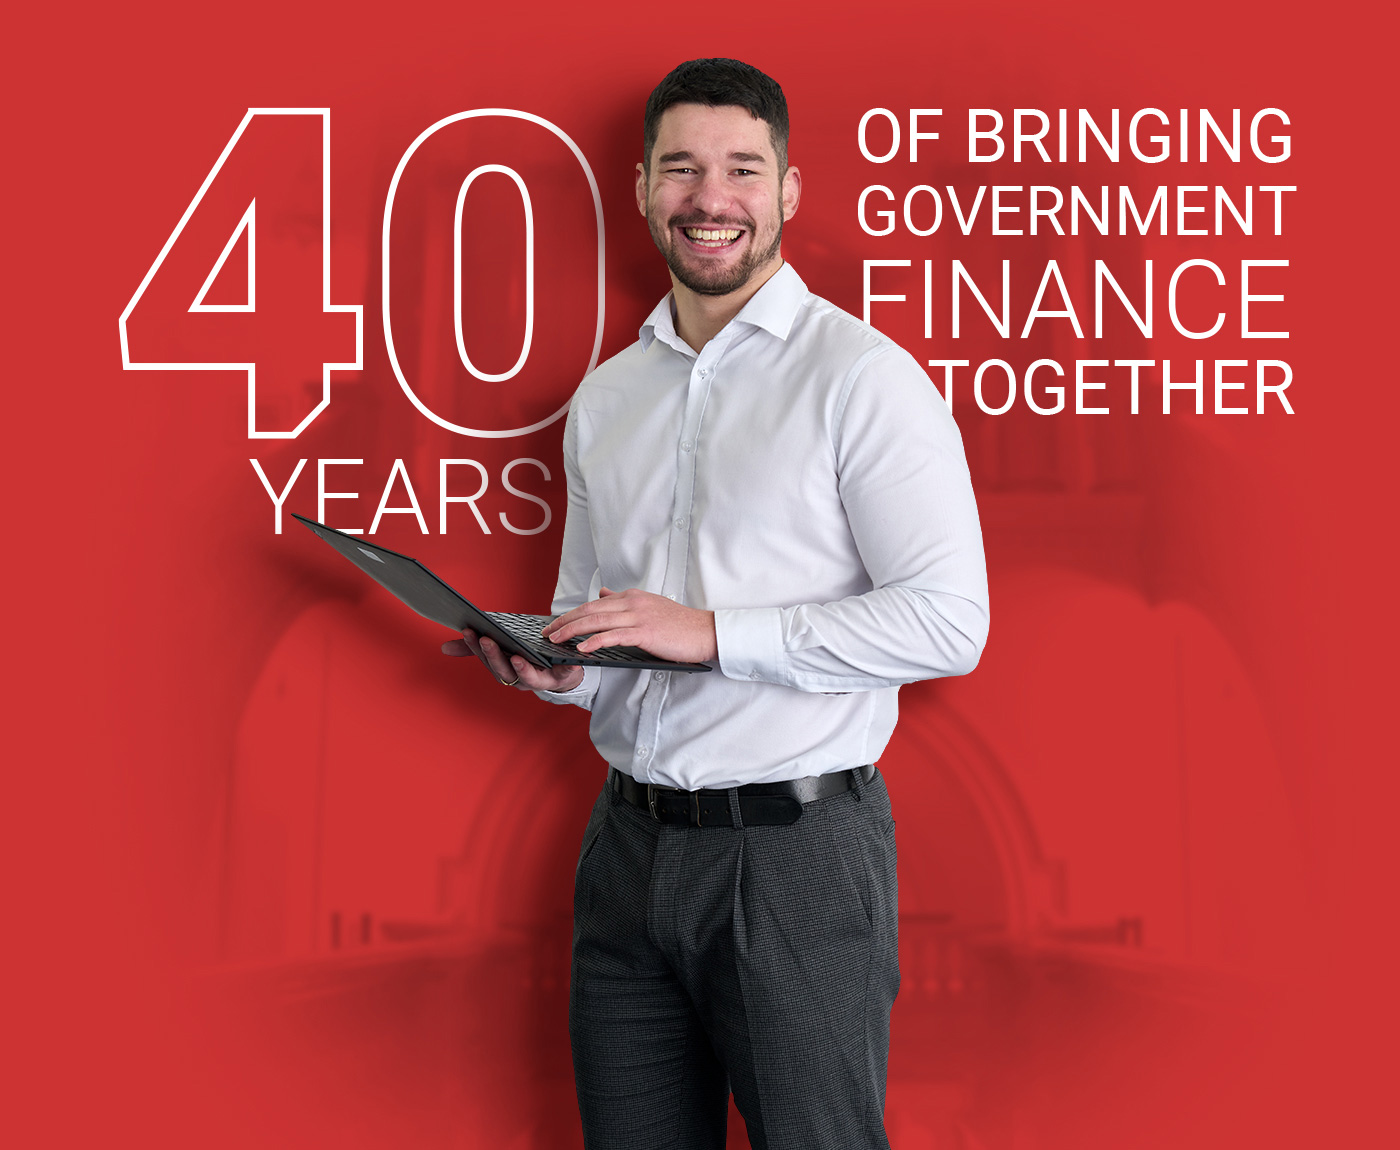 40 years of bringing government finance together